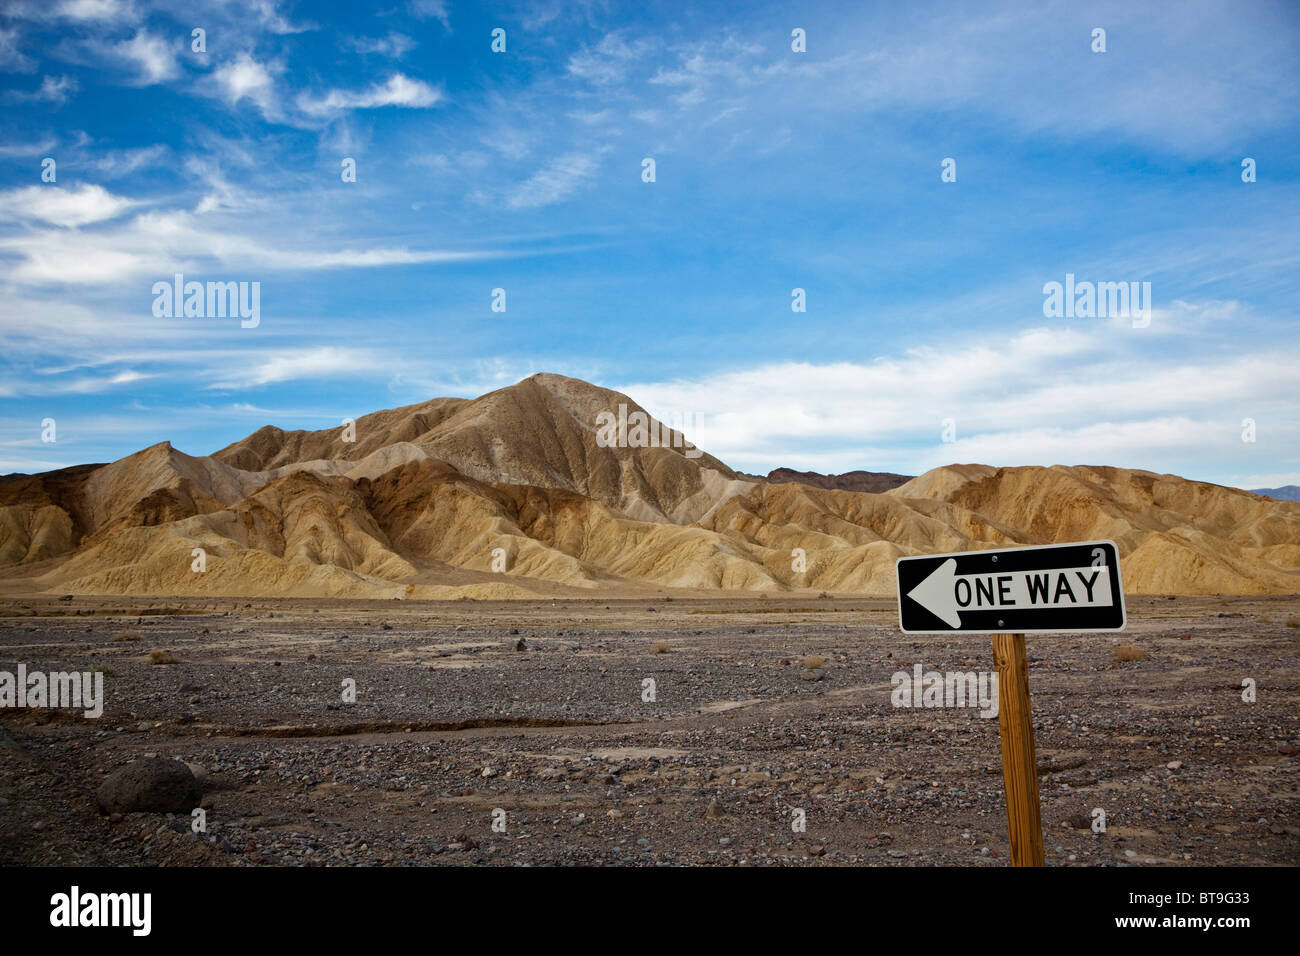 One Way sign in Death Valley National Park, désert de Mojave, Californie, Nevada, USA Banque D'Images